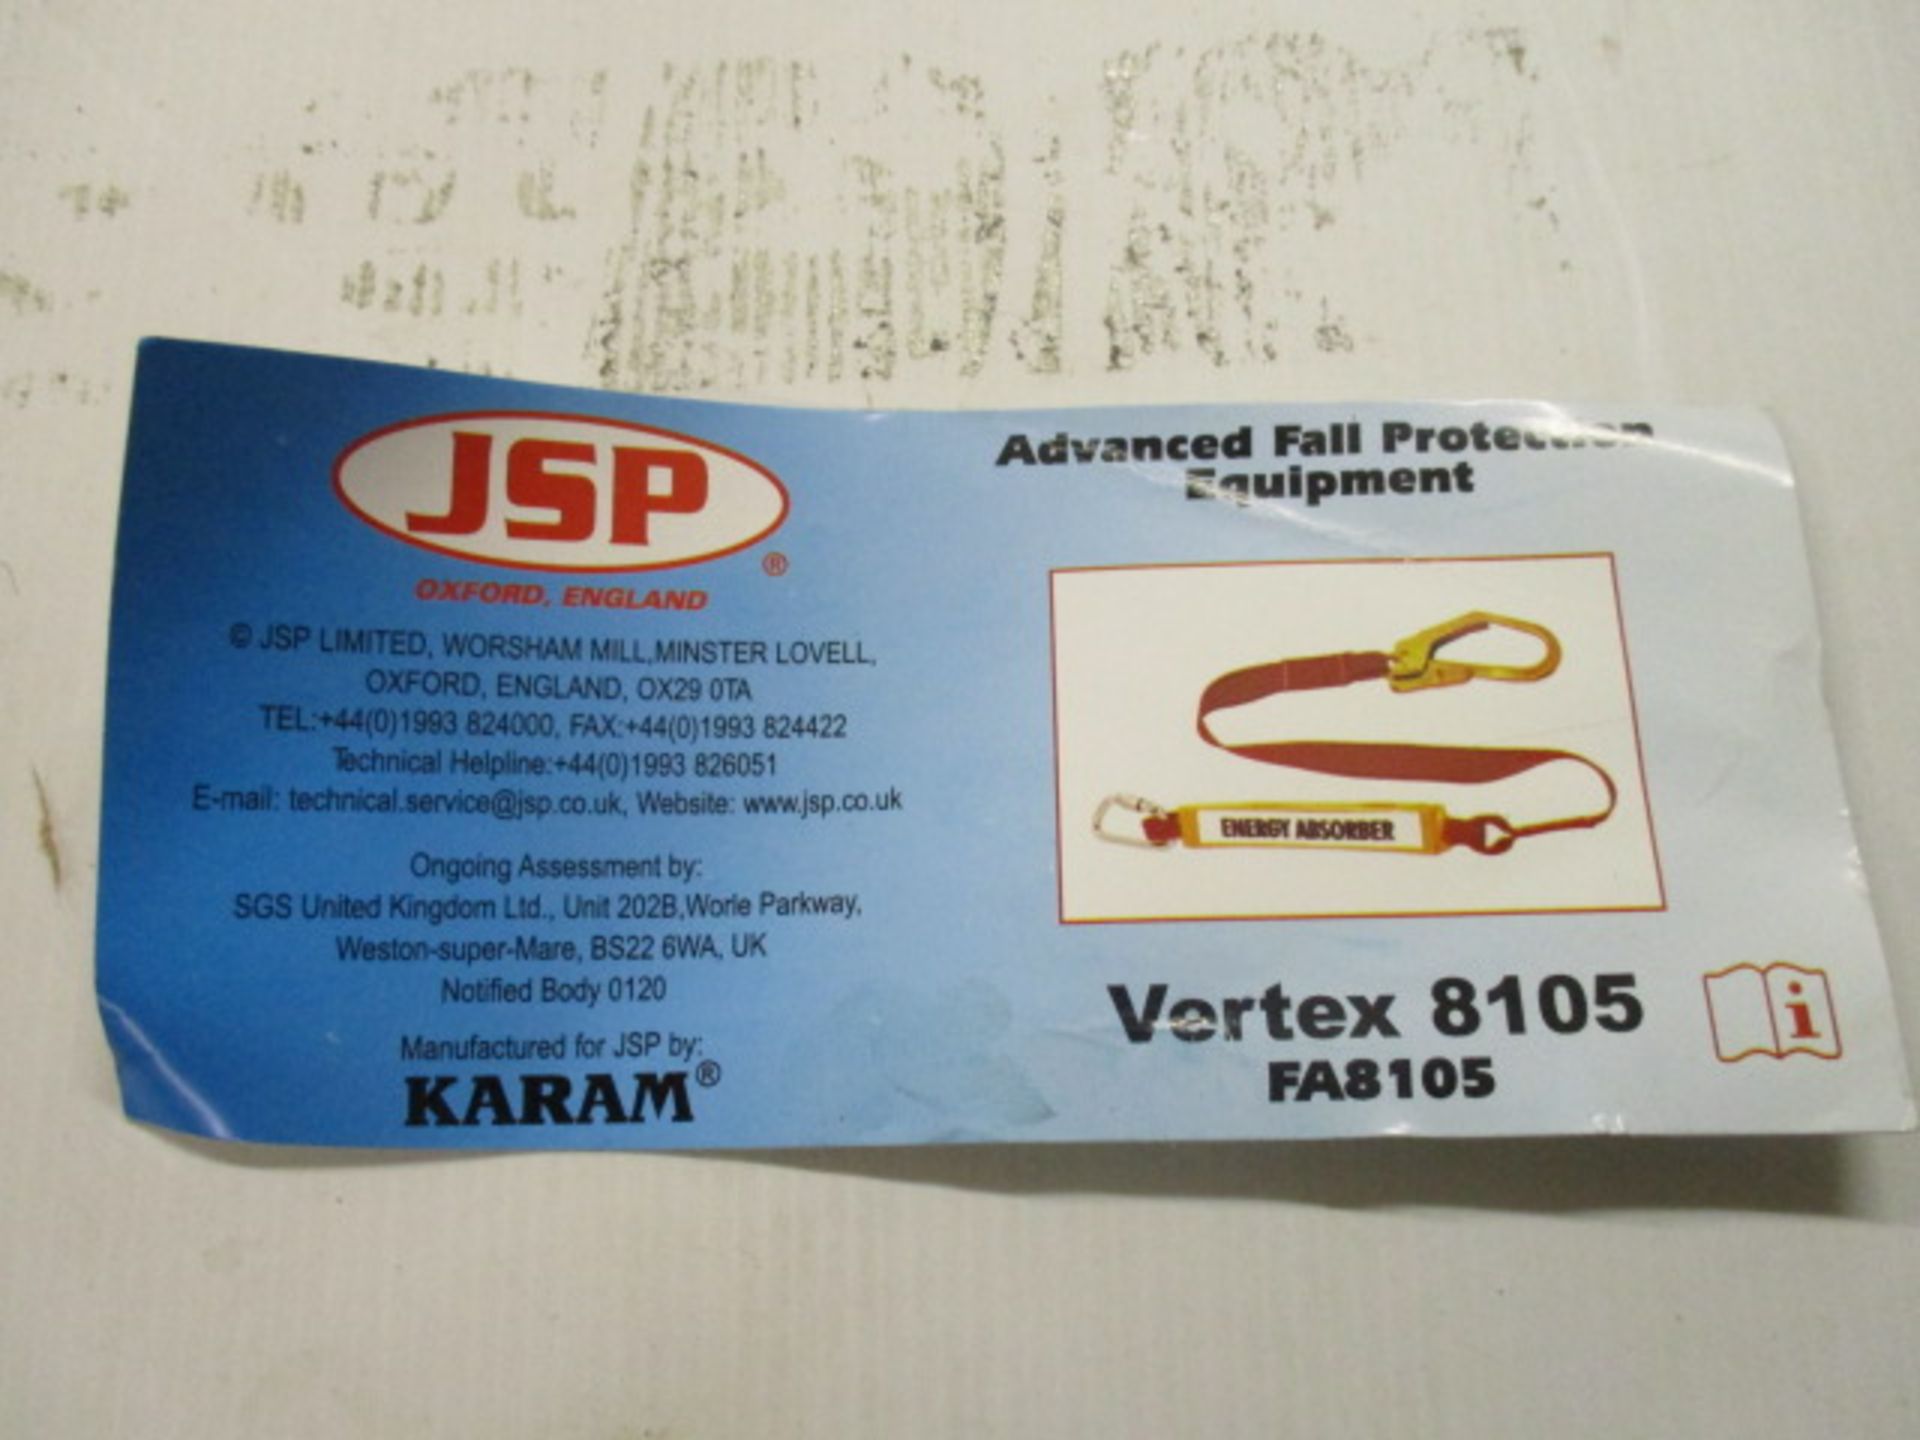 JSP Vertex 8105 scaffolding safety strap and harness - brand new - rrp £79.99 - Image 2 of 2